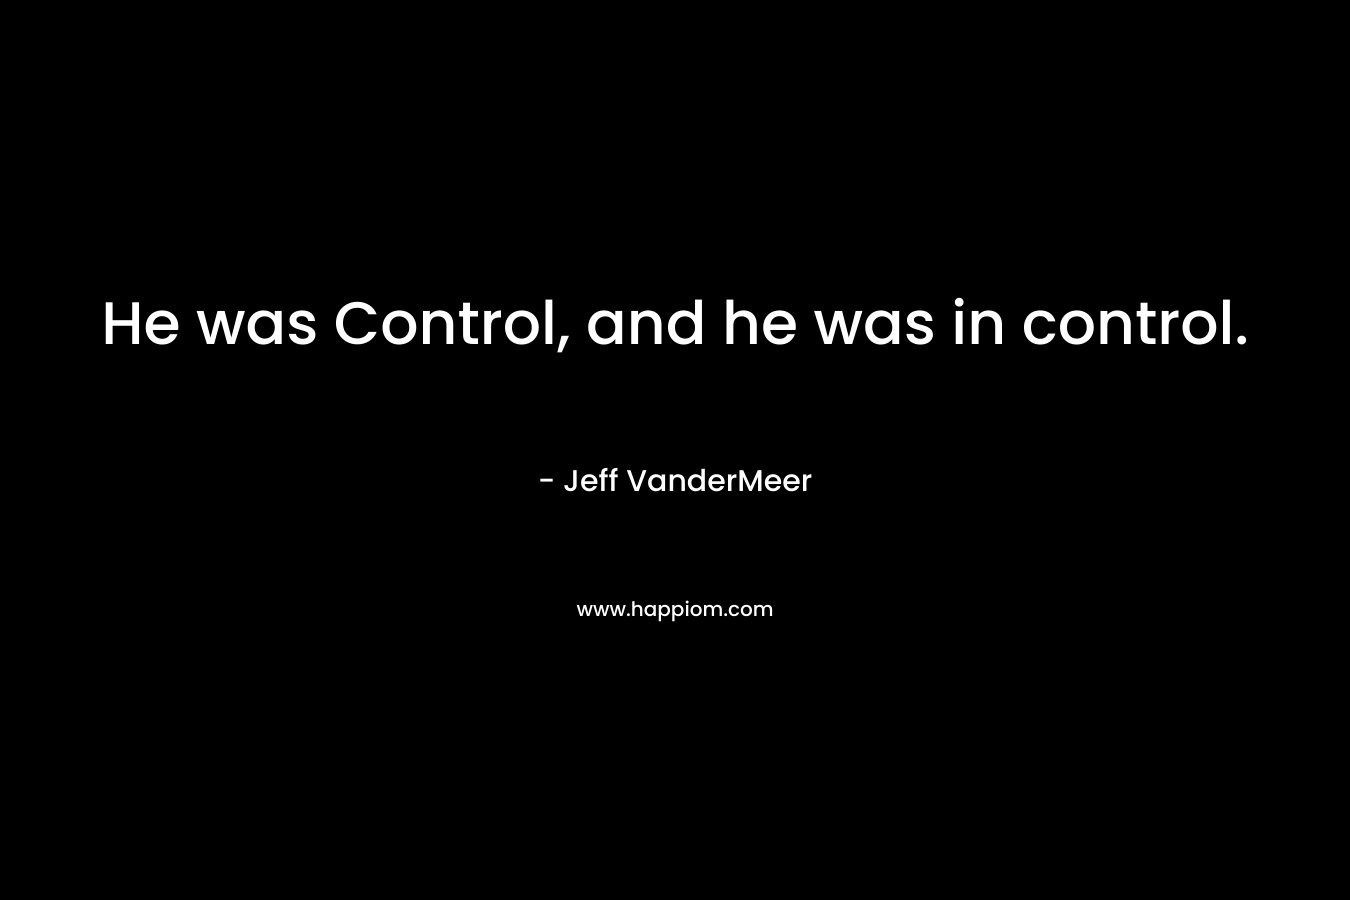 He was Control, and he was in control.